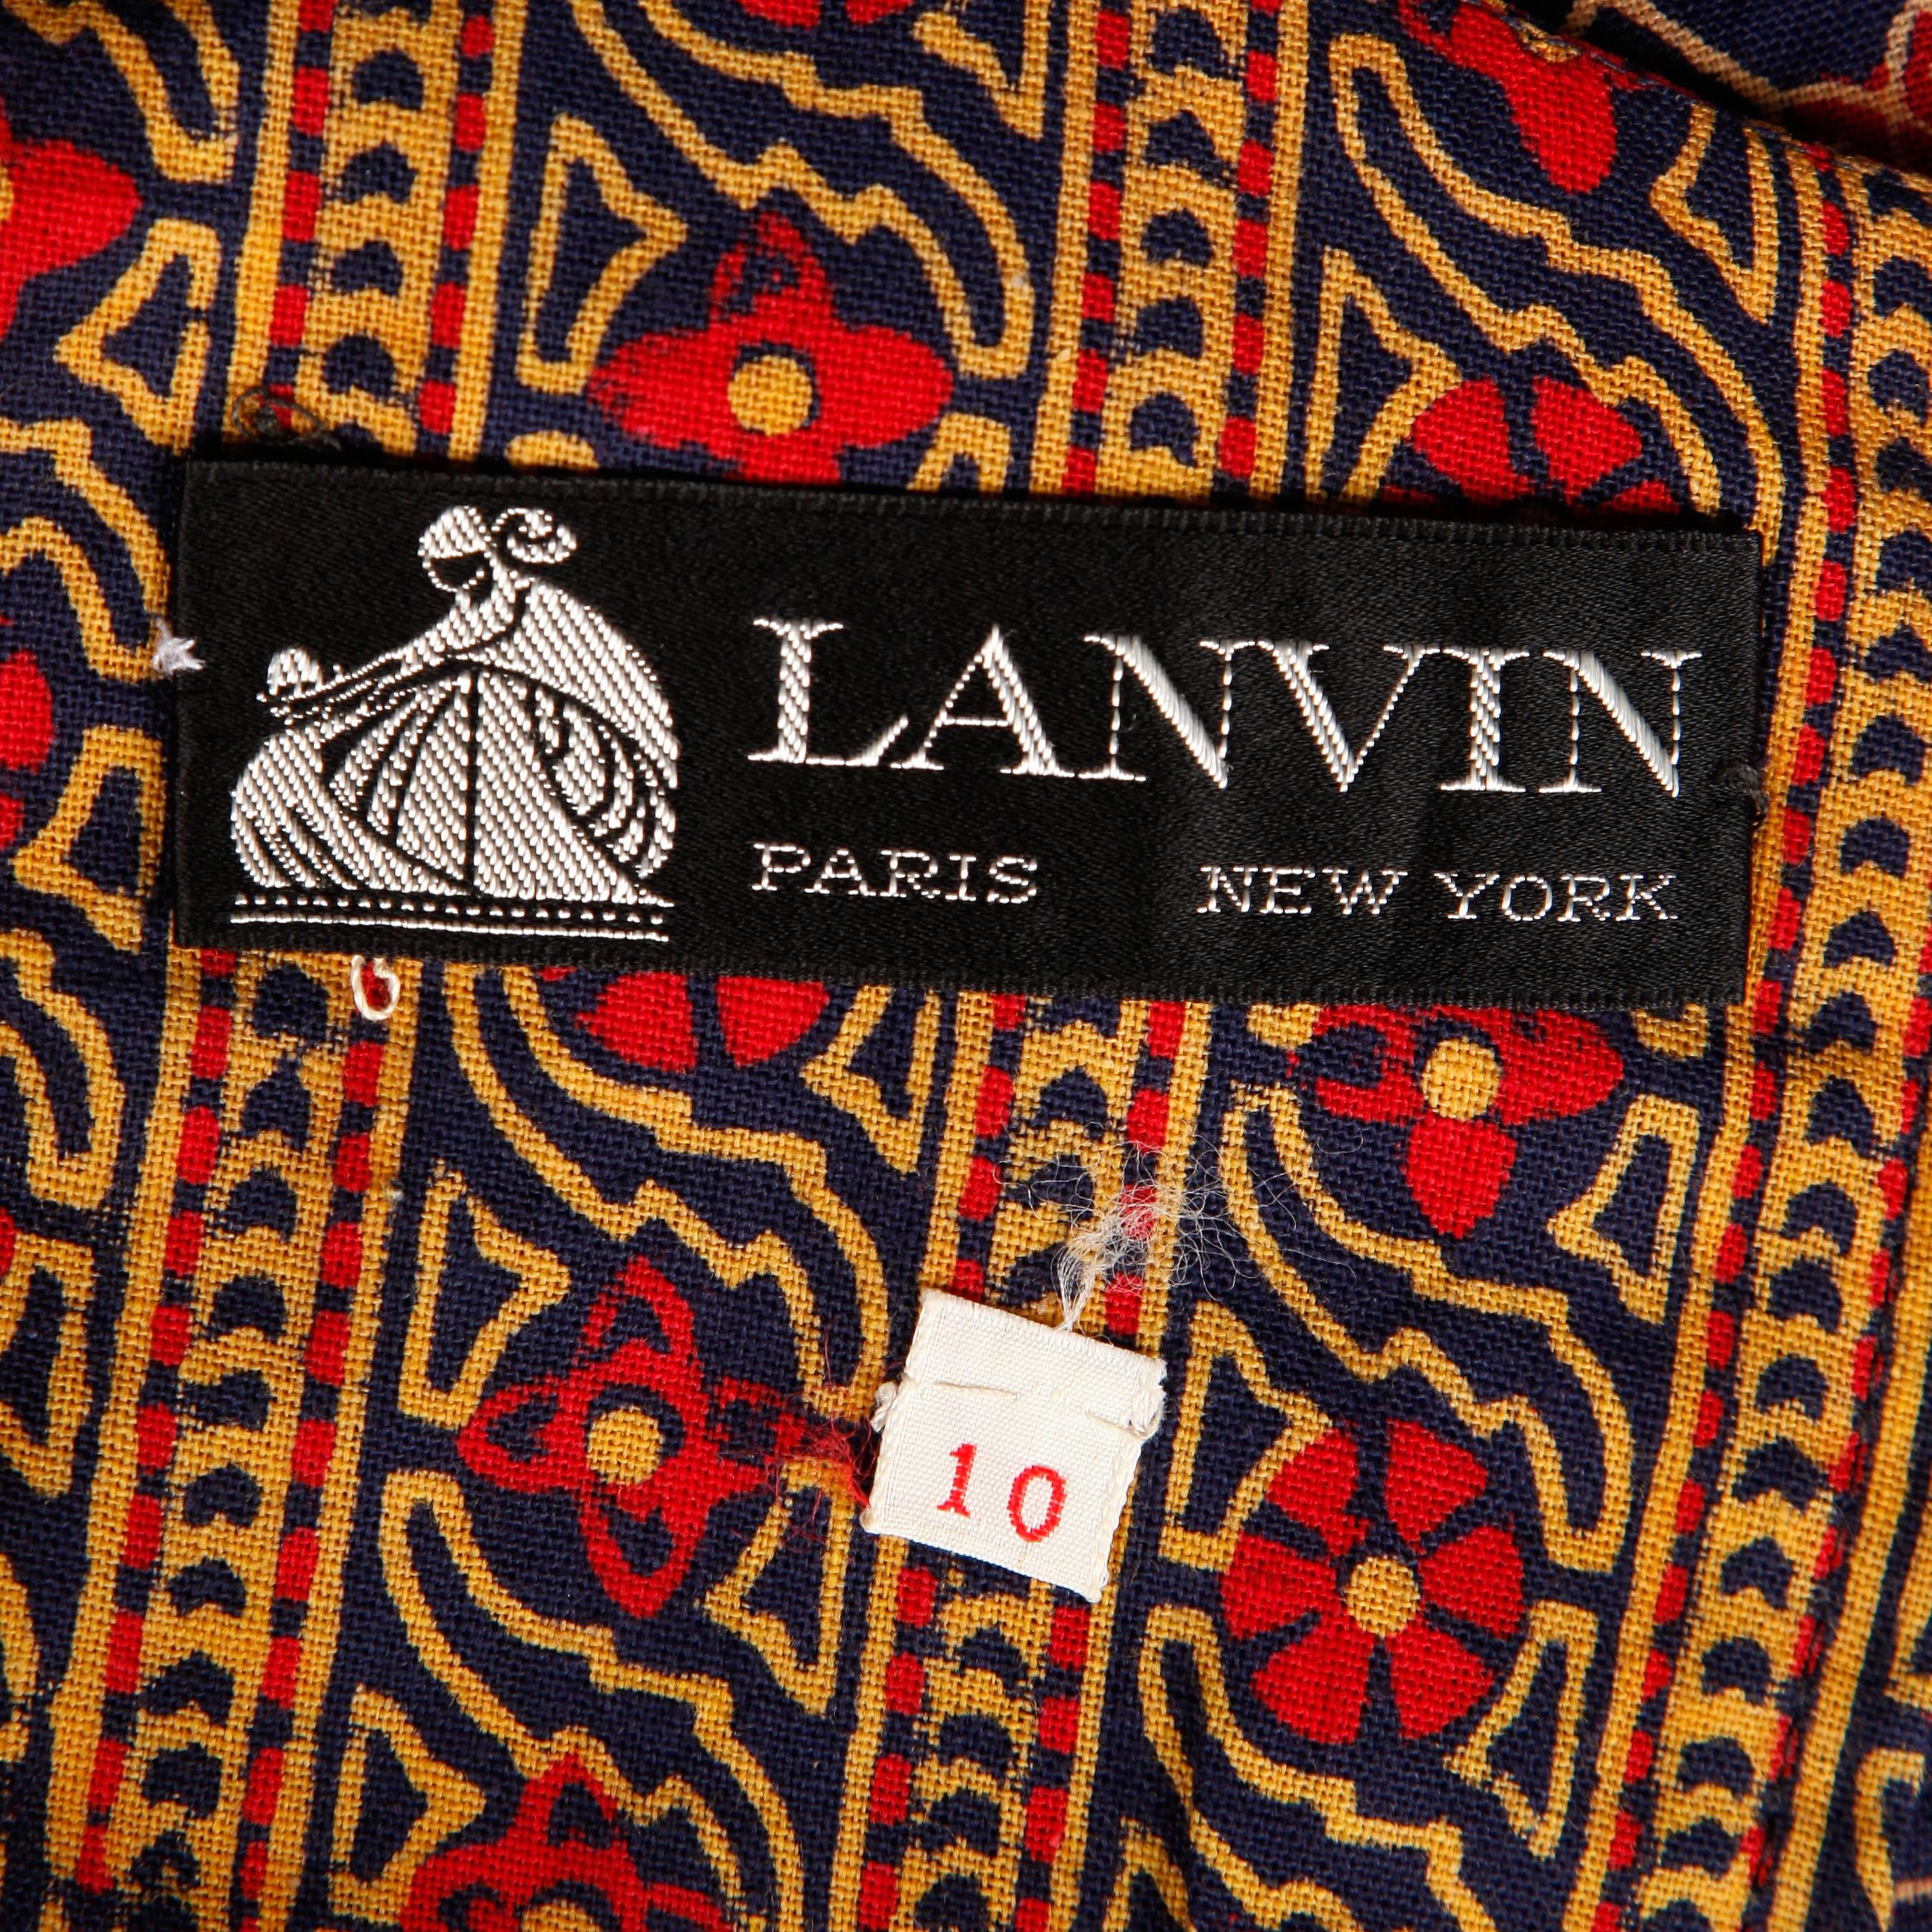 Amazing black label Lanvin from the 1970s! Indian batik print cotton with long sleeves. Fully lined. Rear zip closure. The marked size is 10, and the dress fits like a modern size small-medium. The measurements are as follows: Bust- 34-36